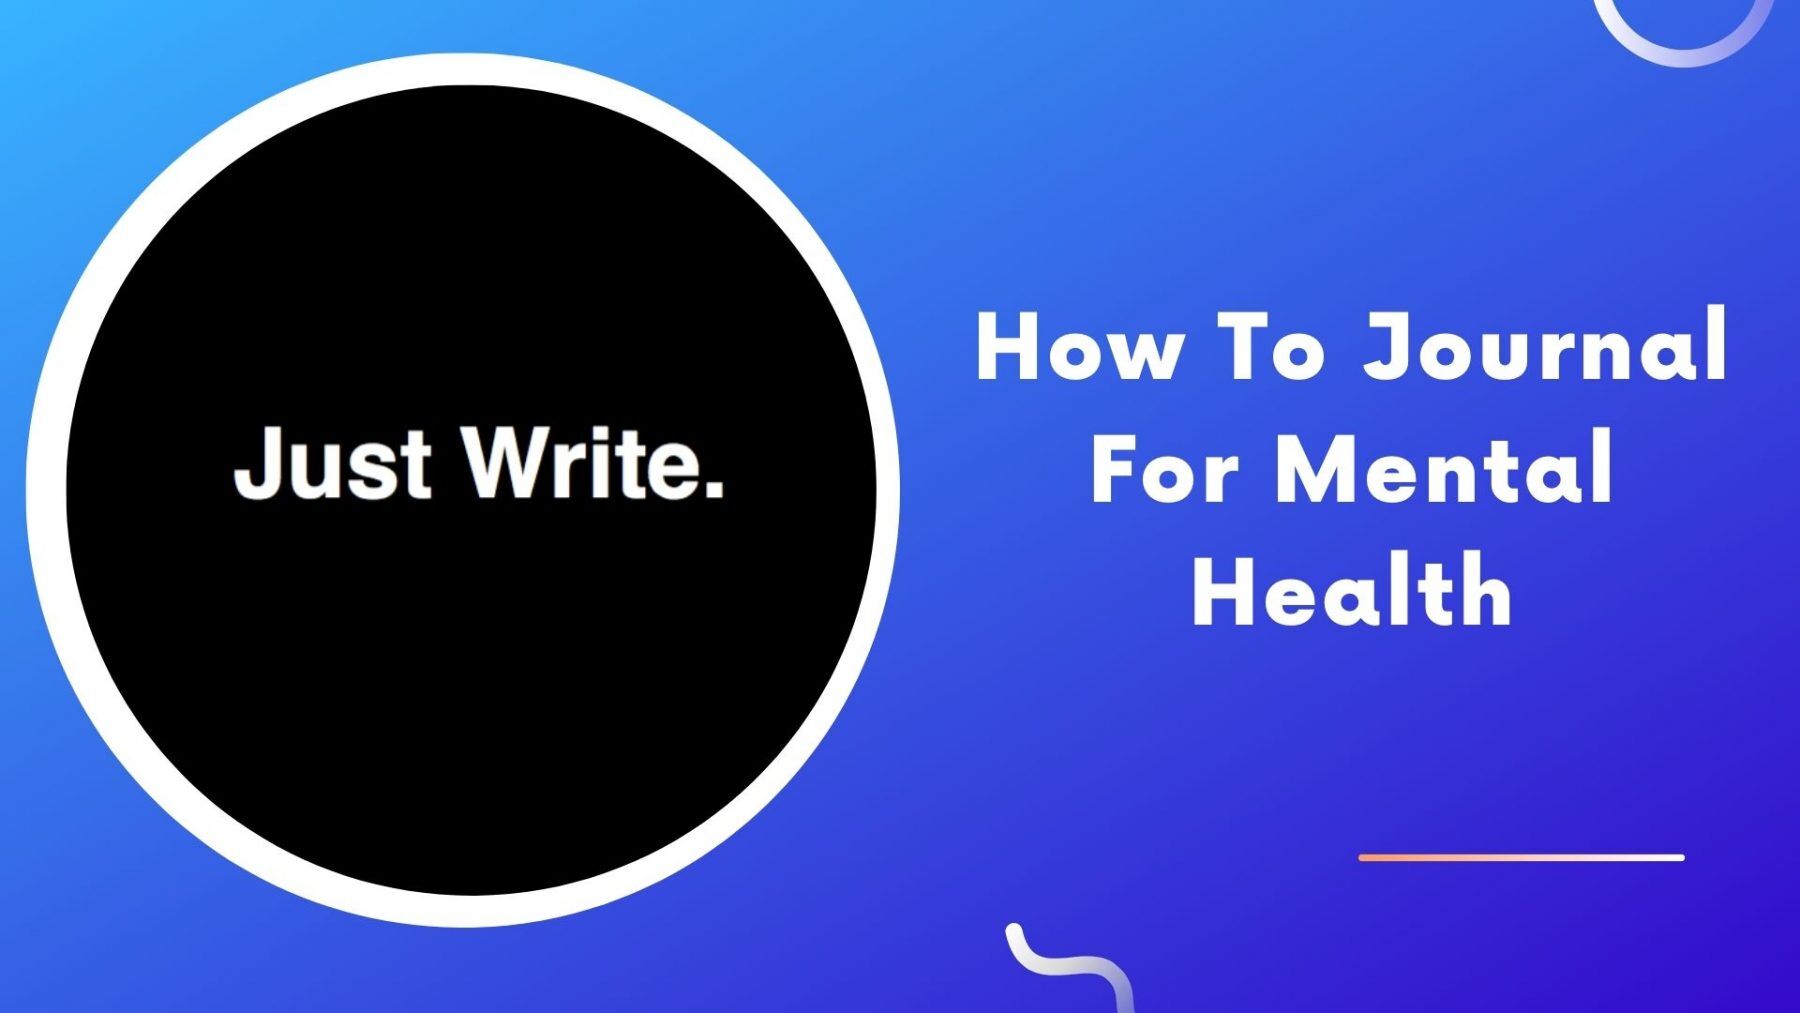 How To Journal For Mental Health